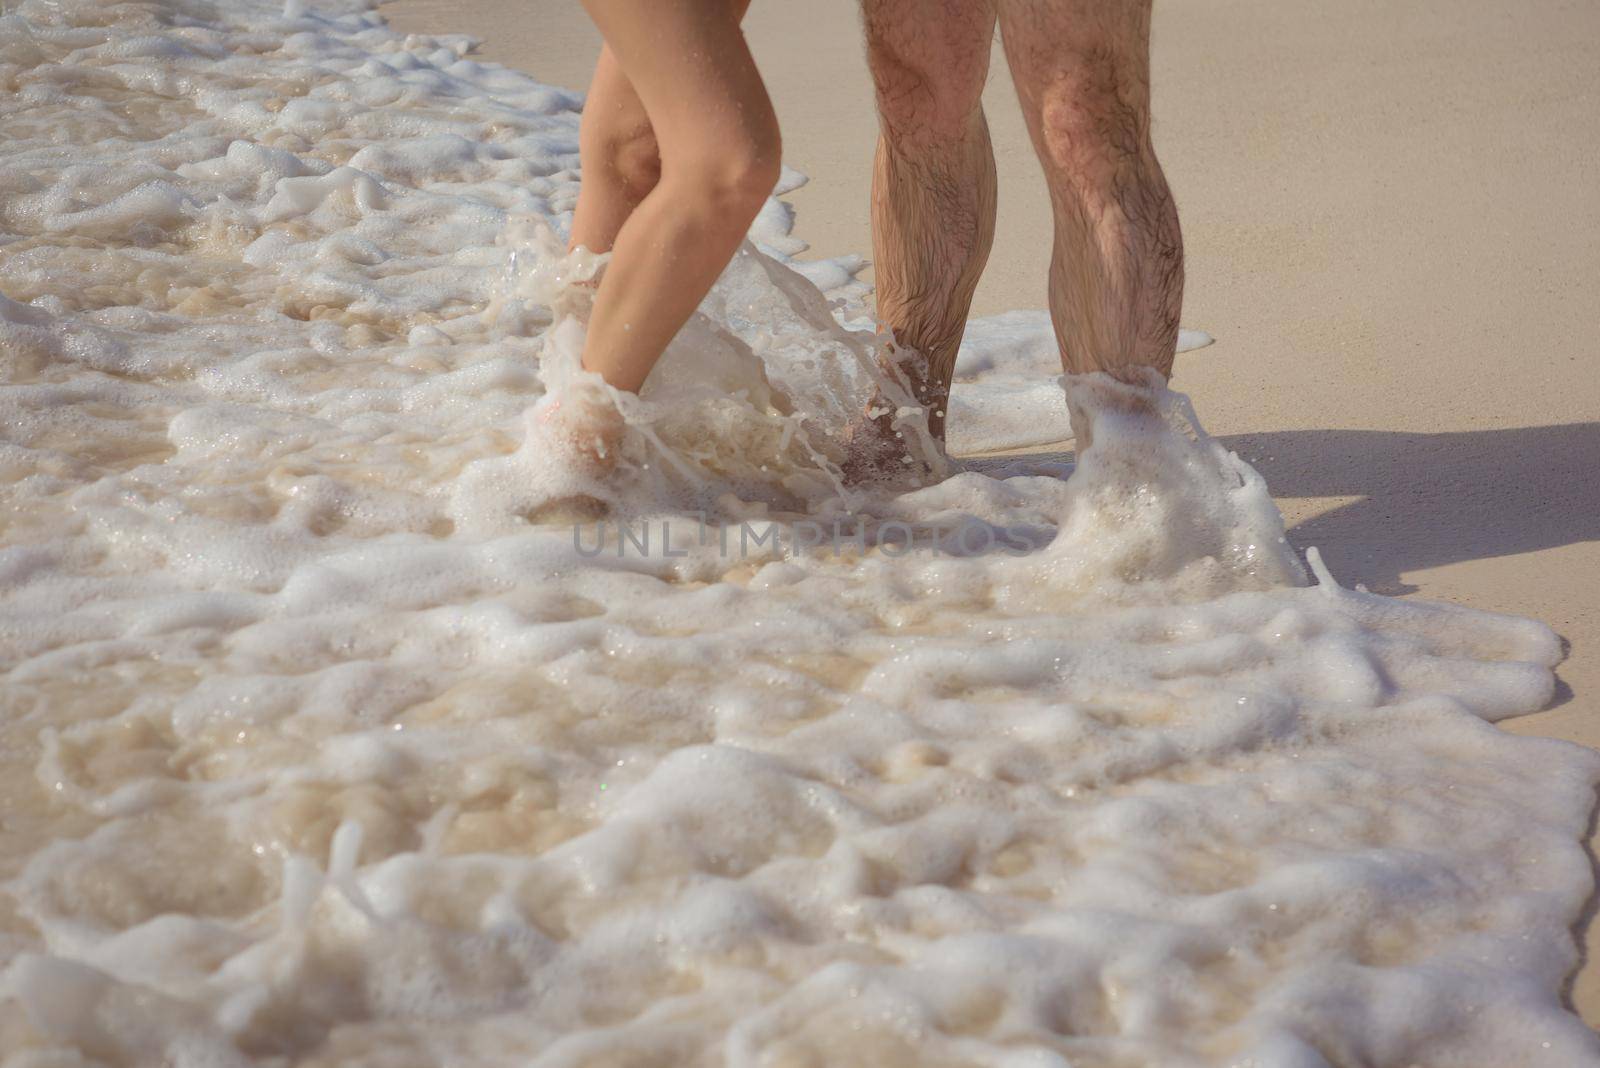 Feet of man and woman in the sand.